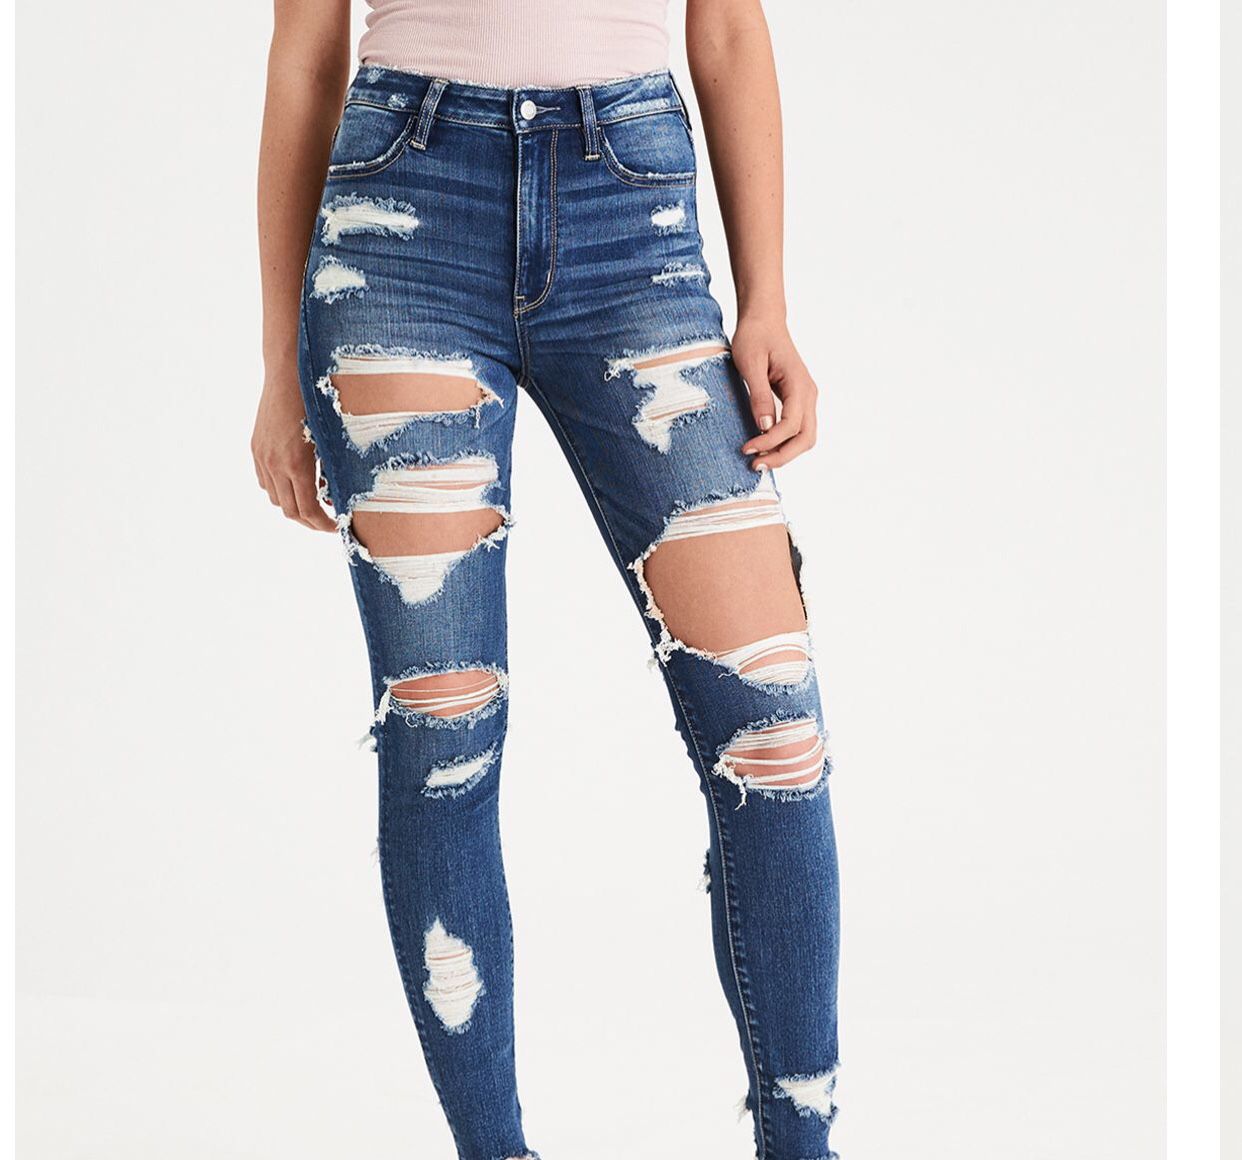 American Eagle Super High Waisted Ripped Jeans for Sale in Selah, WA -  OfferUp